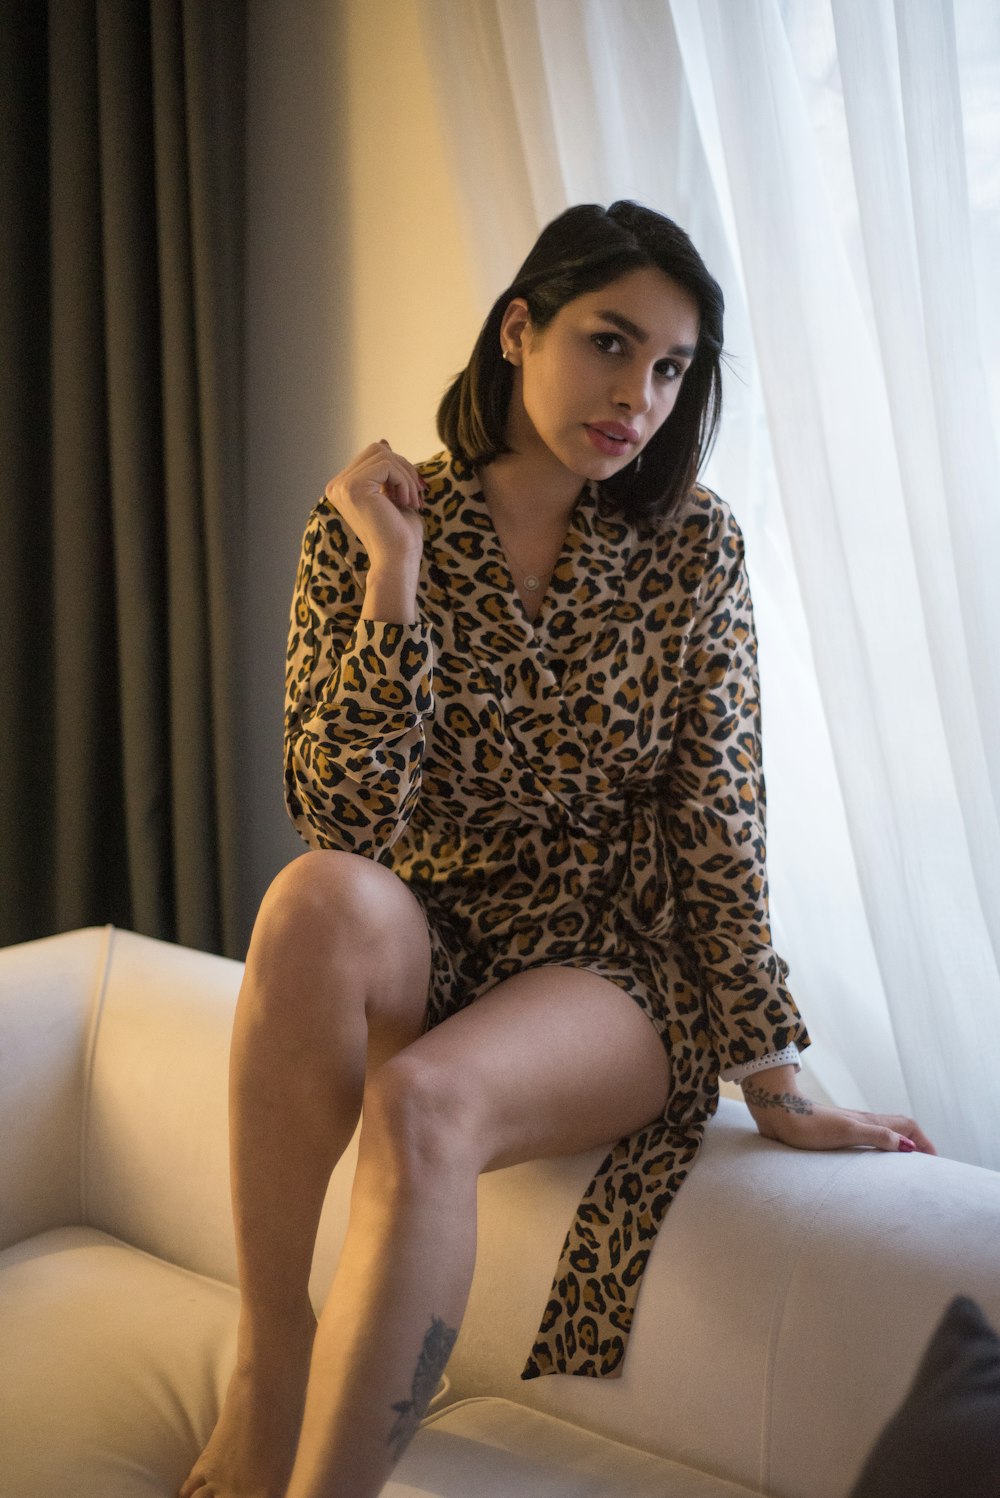 a woman sitting on a couch wearing a leopard print robe